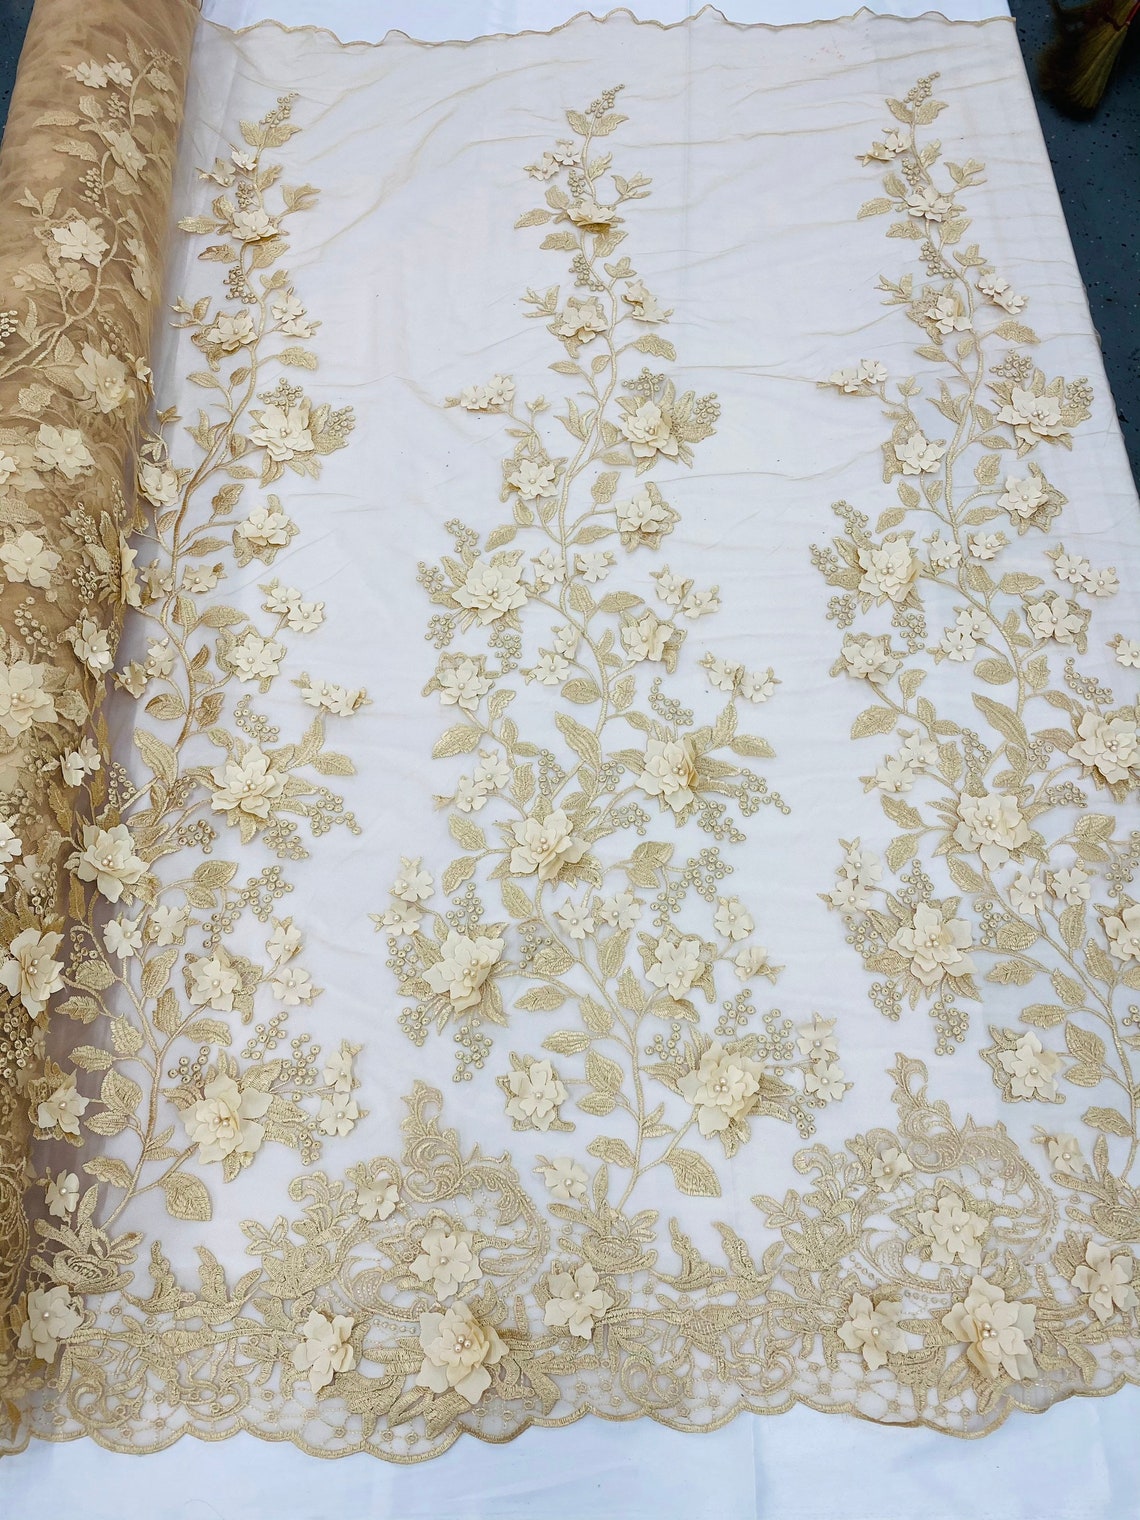 3D Floral Princess Fabric - Champagne - Embroidered Floral Lace Fabric with 3D Flowers By Yard